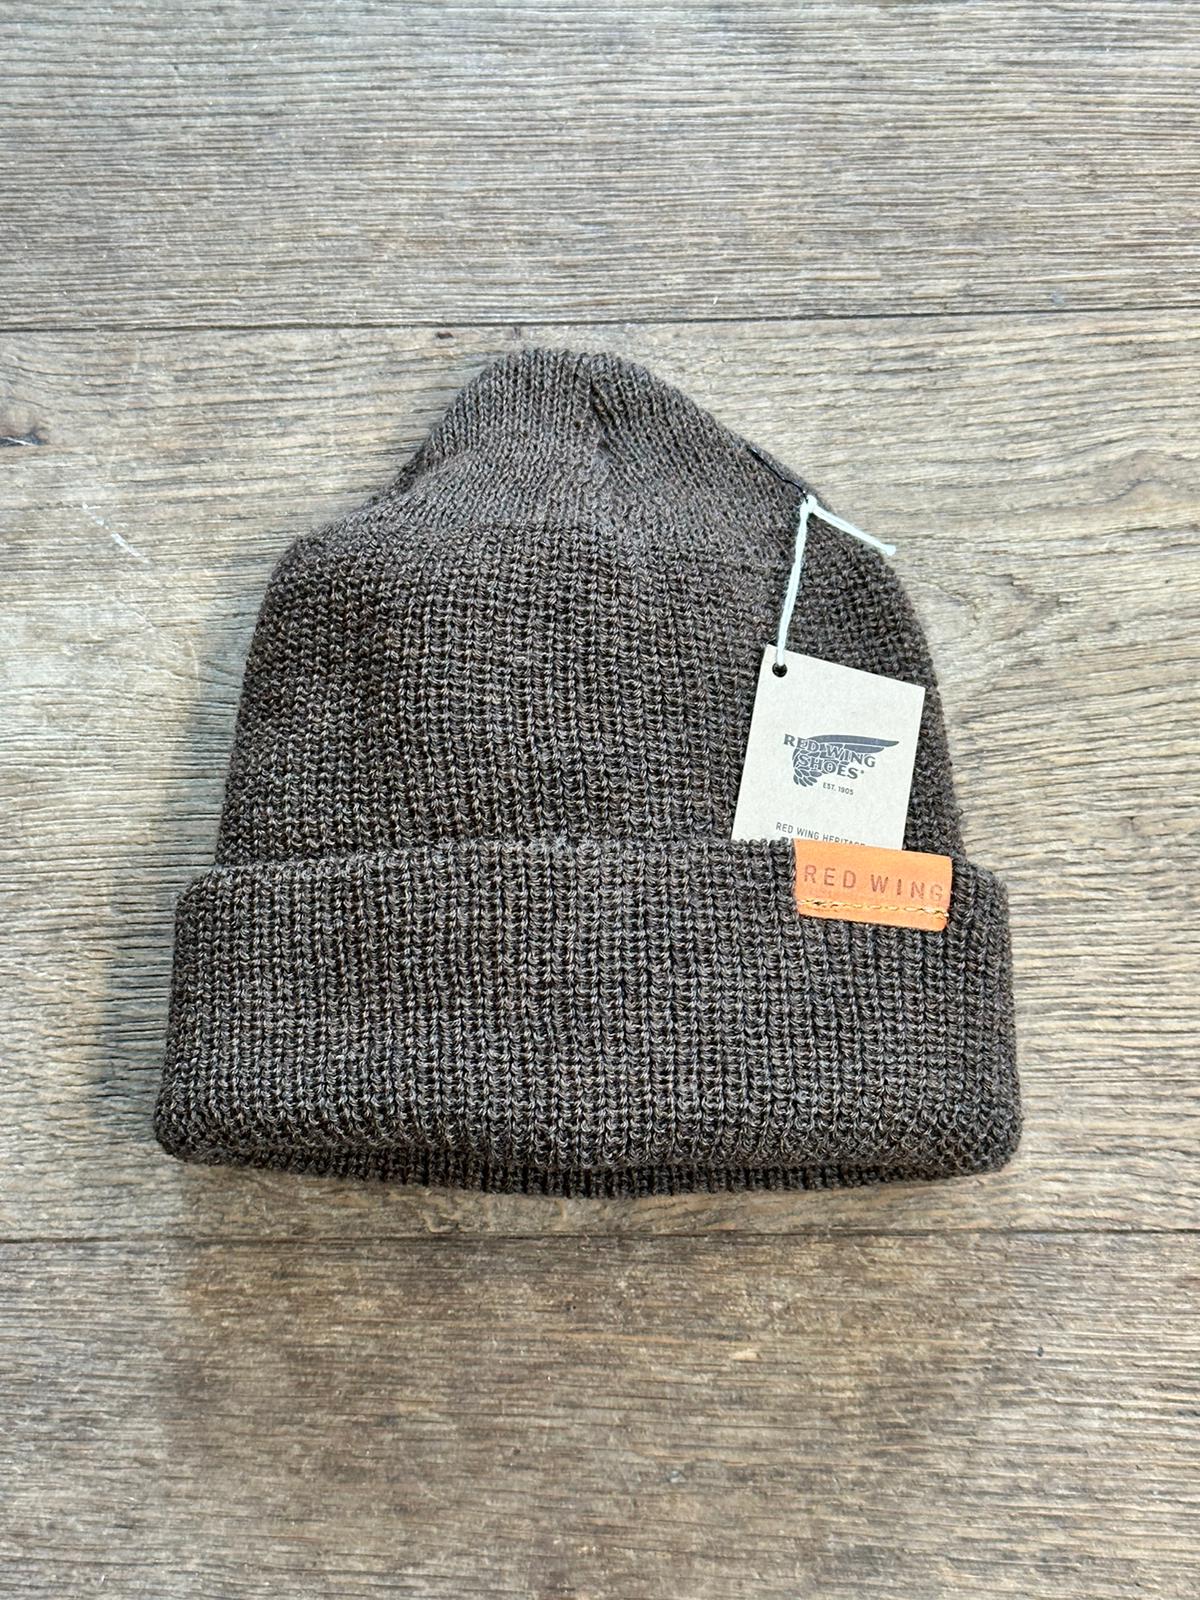 Beanie - Red Wing London